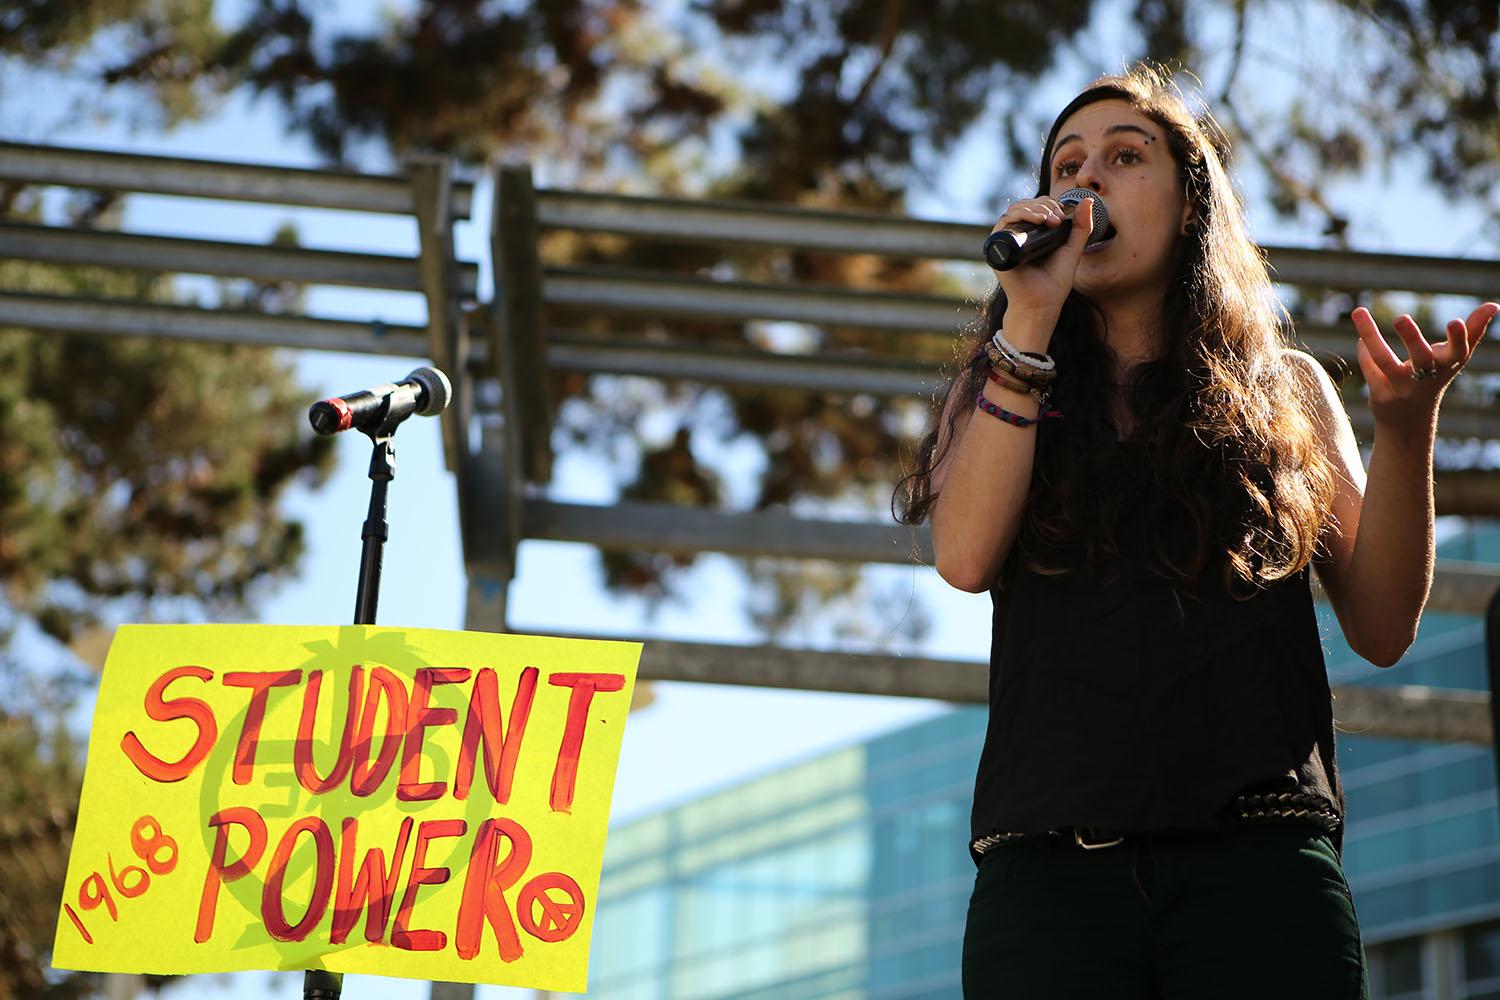 SF State Real Food Challenge member Celia LoBuono Gonzalez, a third year communications and geography major, speaks about pouring rights during the Speak Out rally in Malcom X Plaza on Tuesday, Oct. 20, 2015. ( Joel Angel Juárez / Xpress)